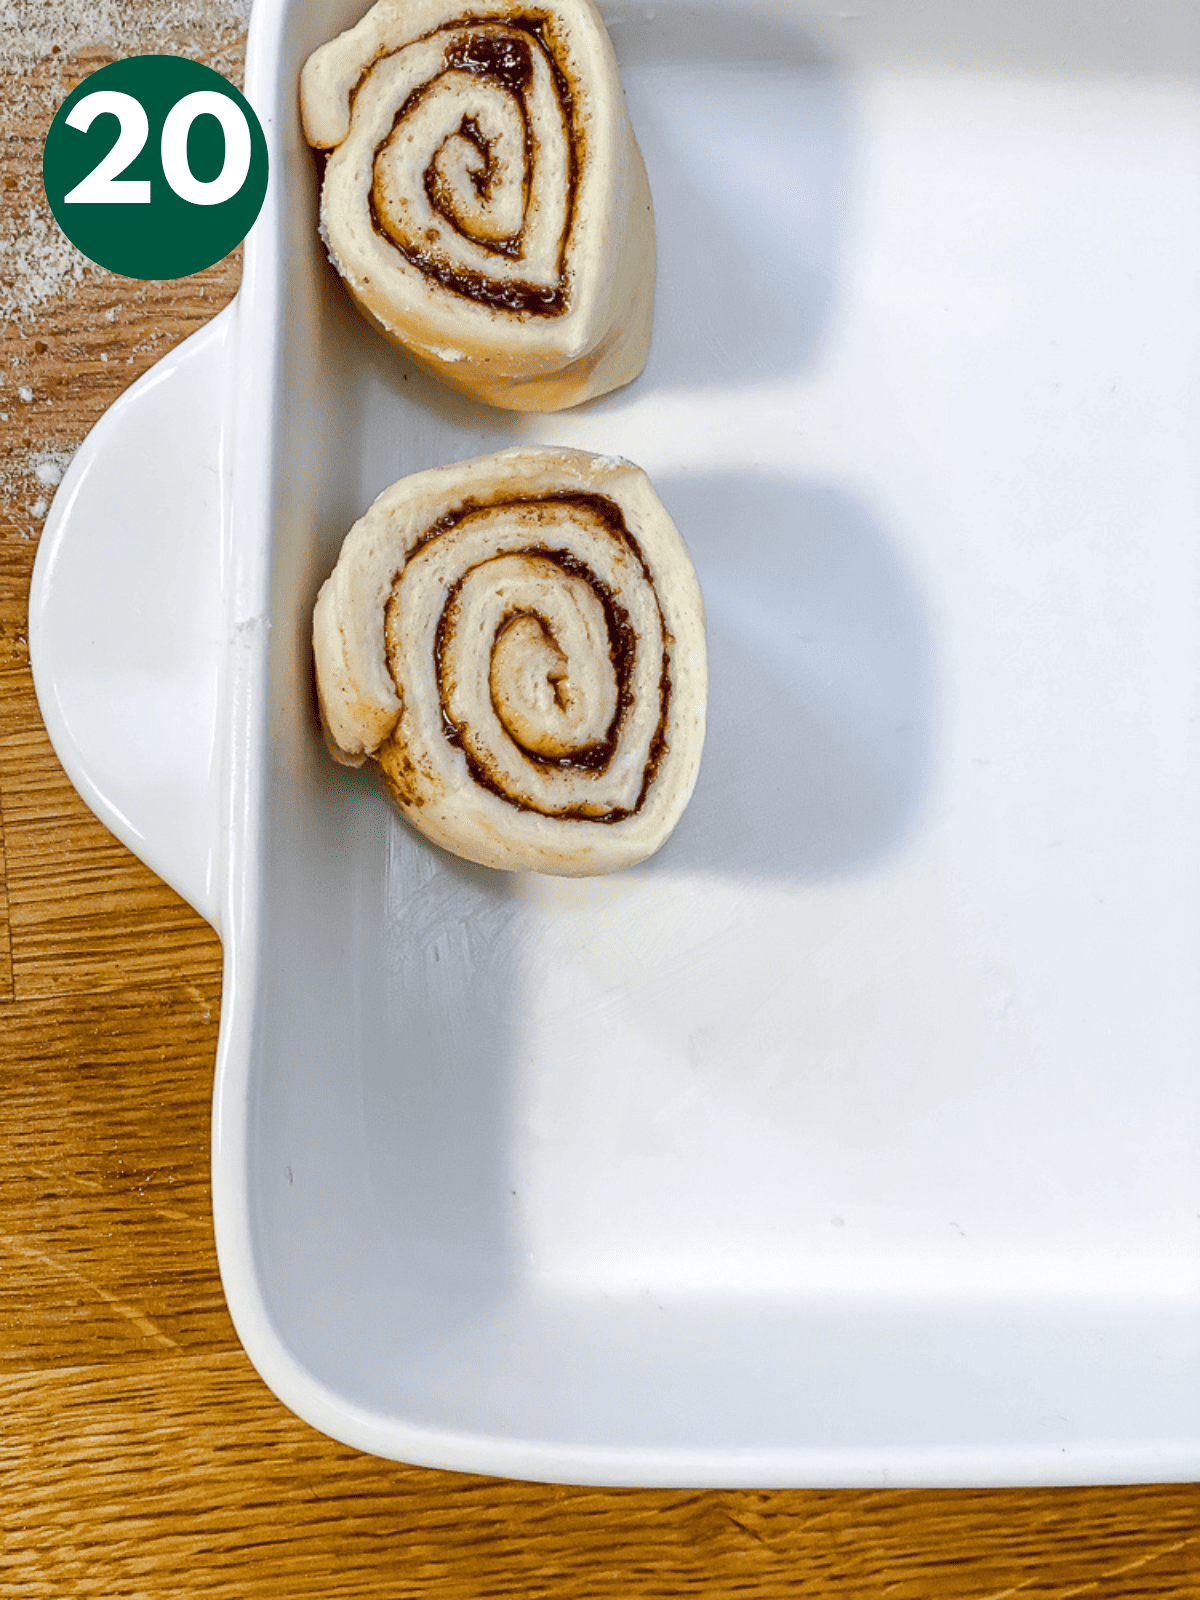 placing unbaked cinnamon rolls in a white baking dish.